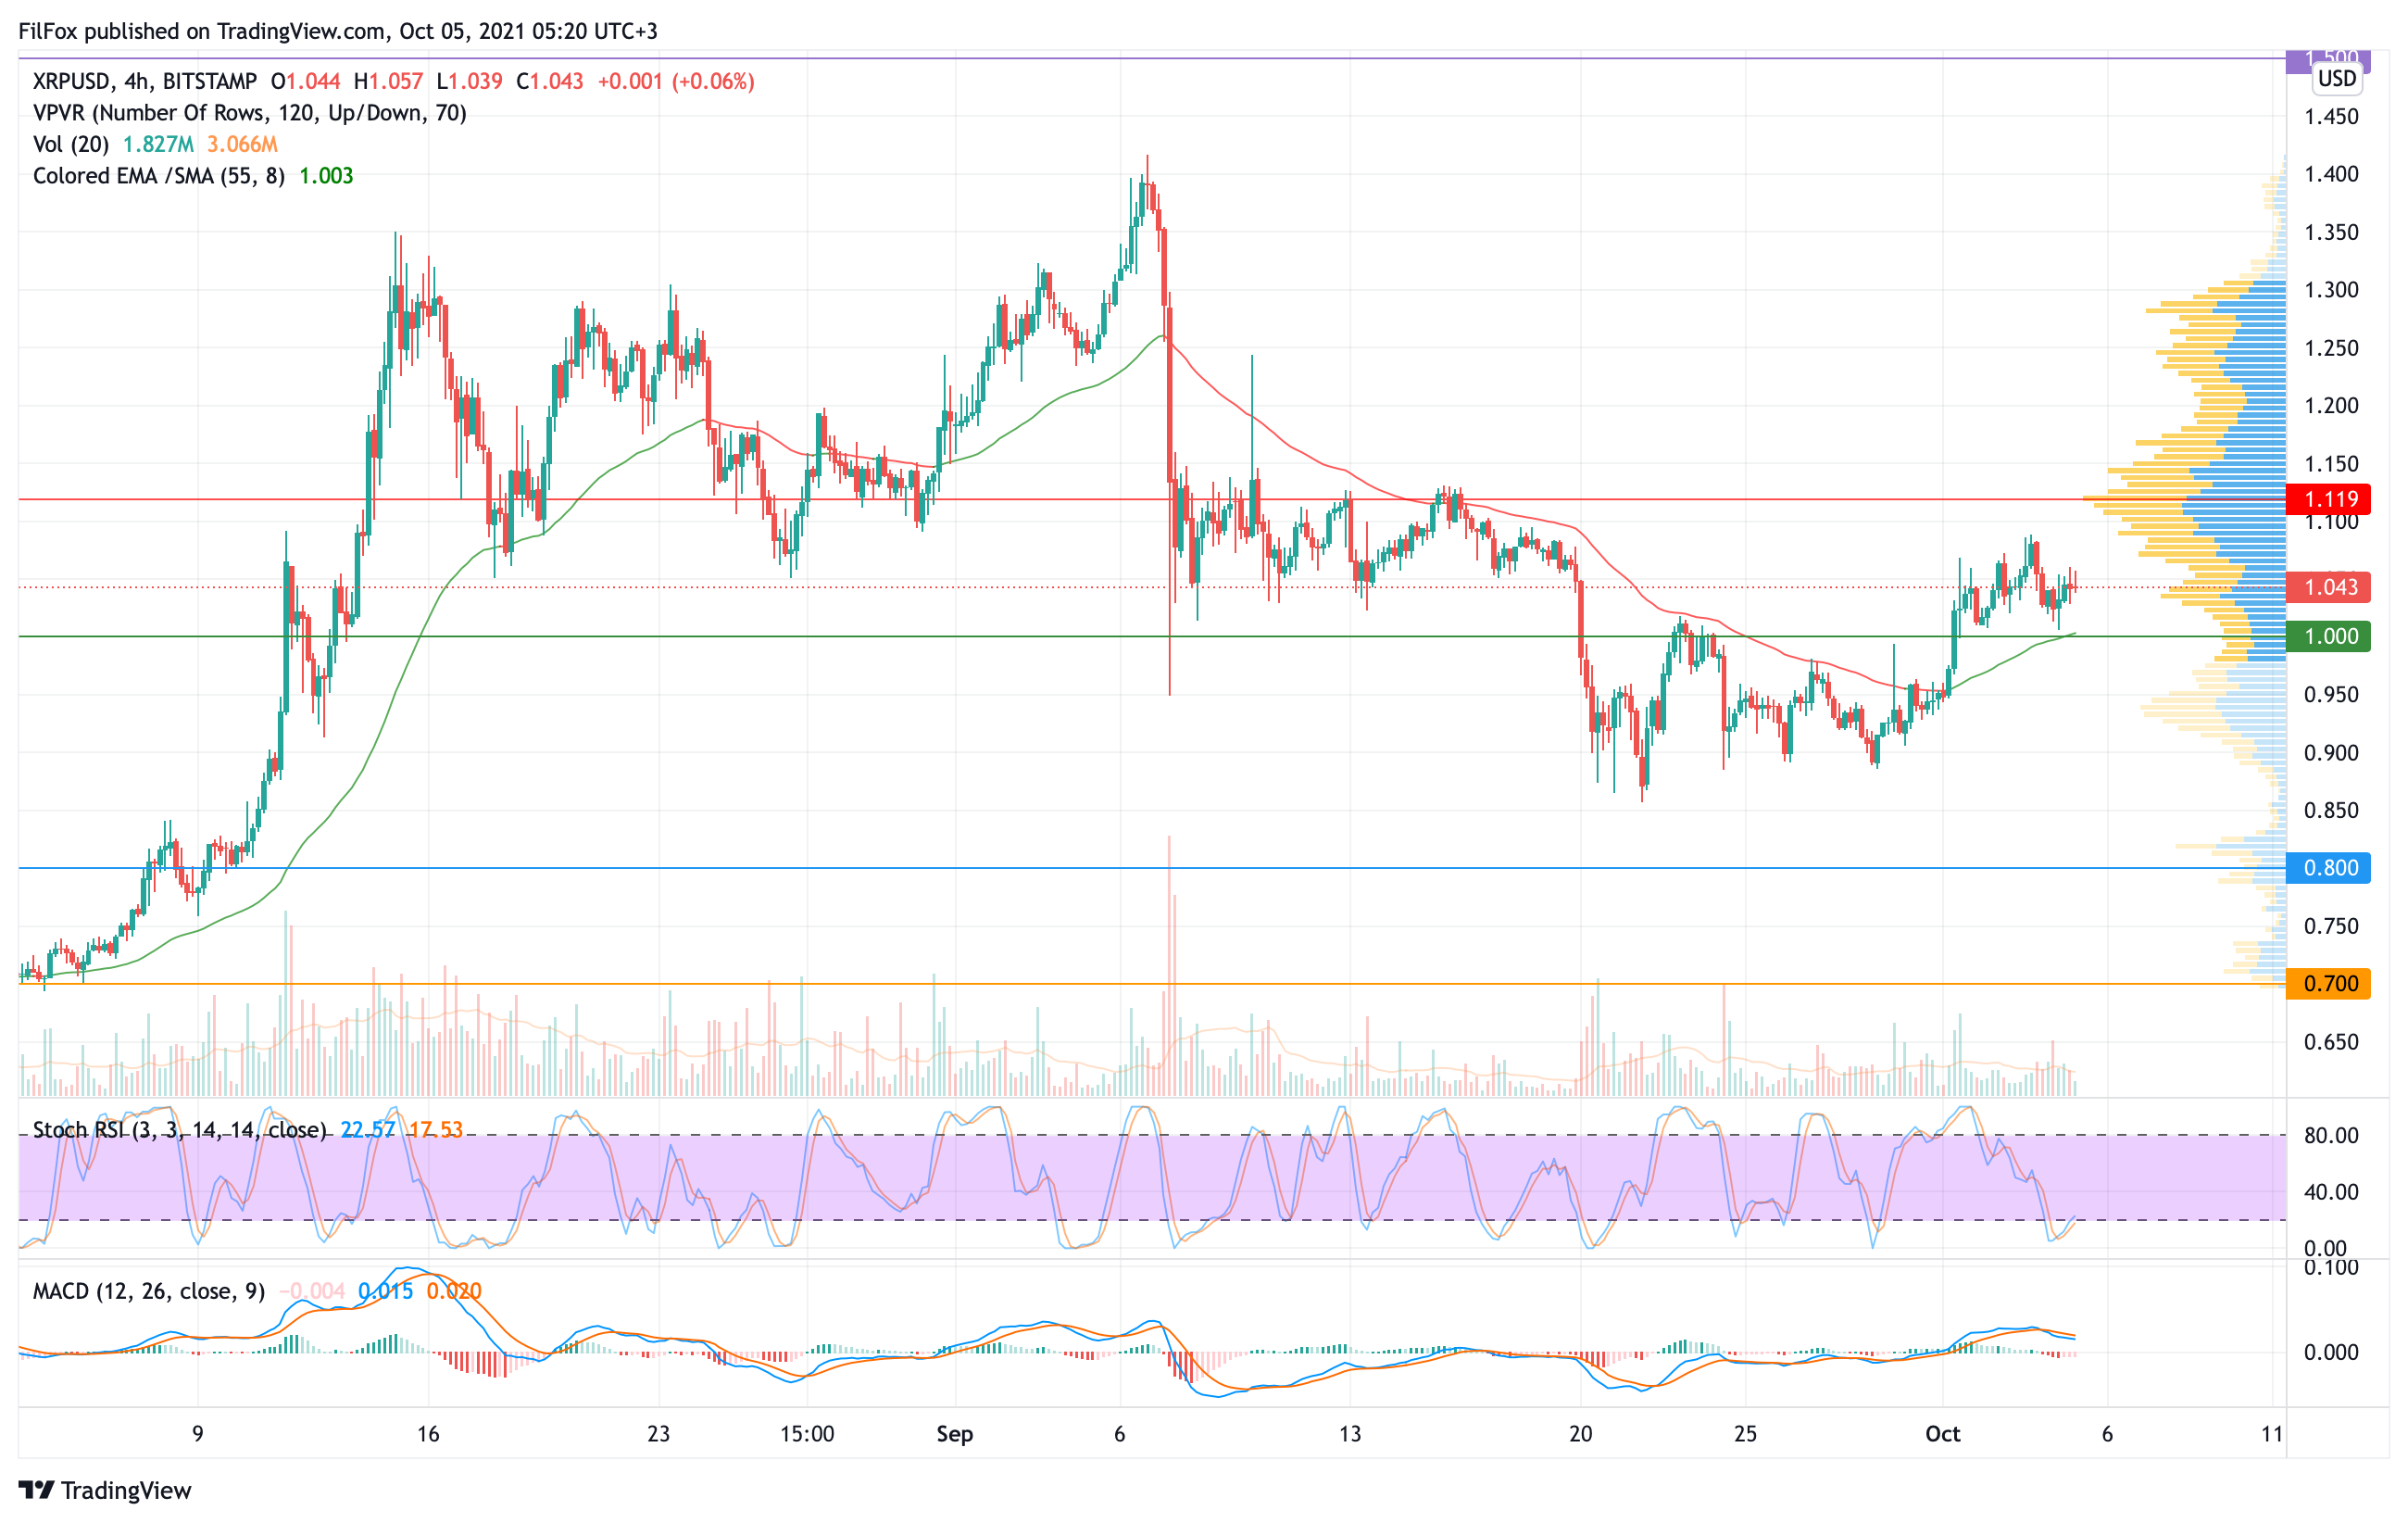 Analysis of the prices of Bitcoin, Ethereum, XRP for 10/05/2021